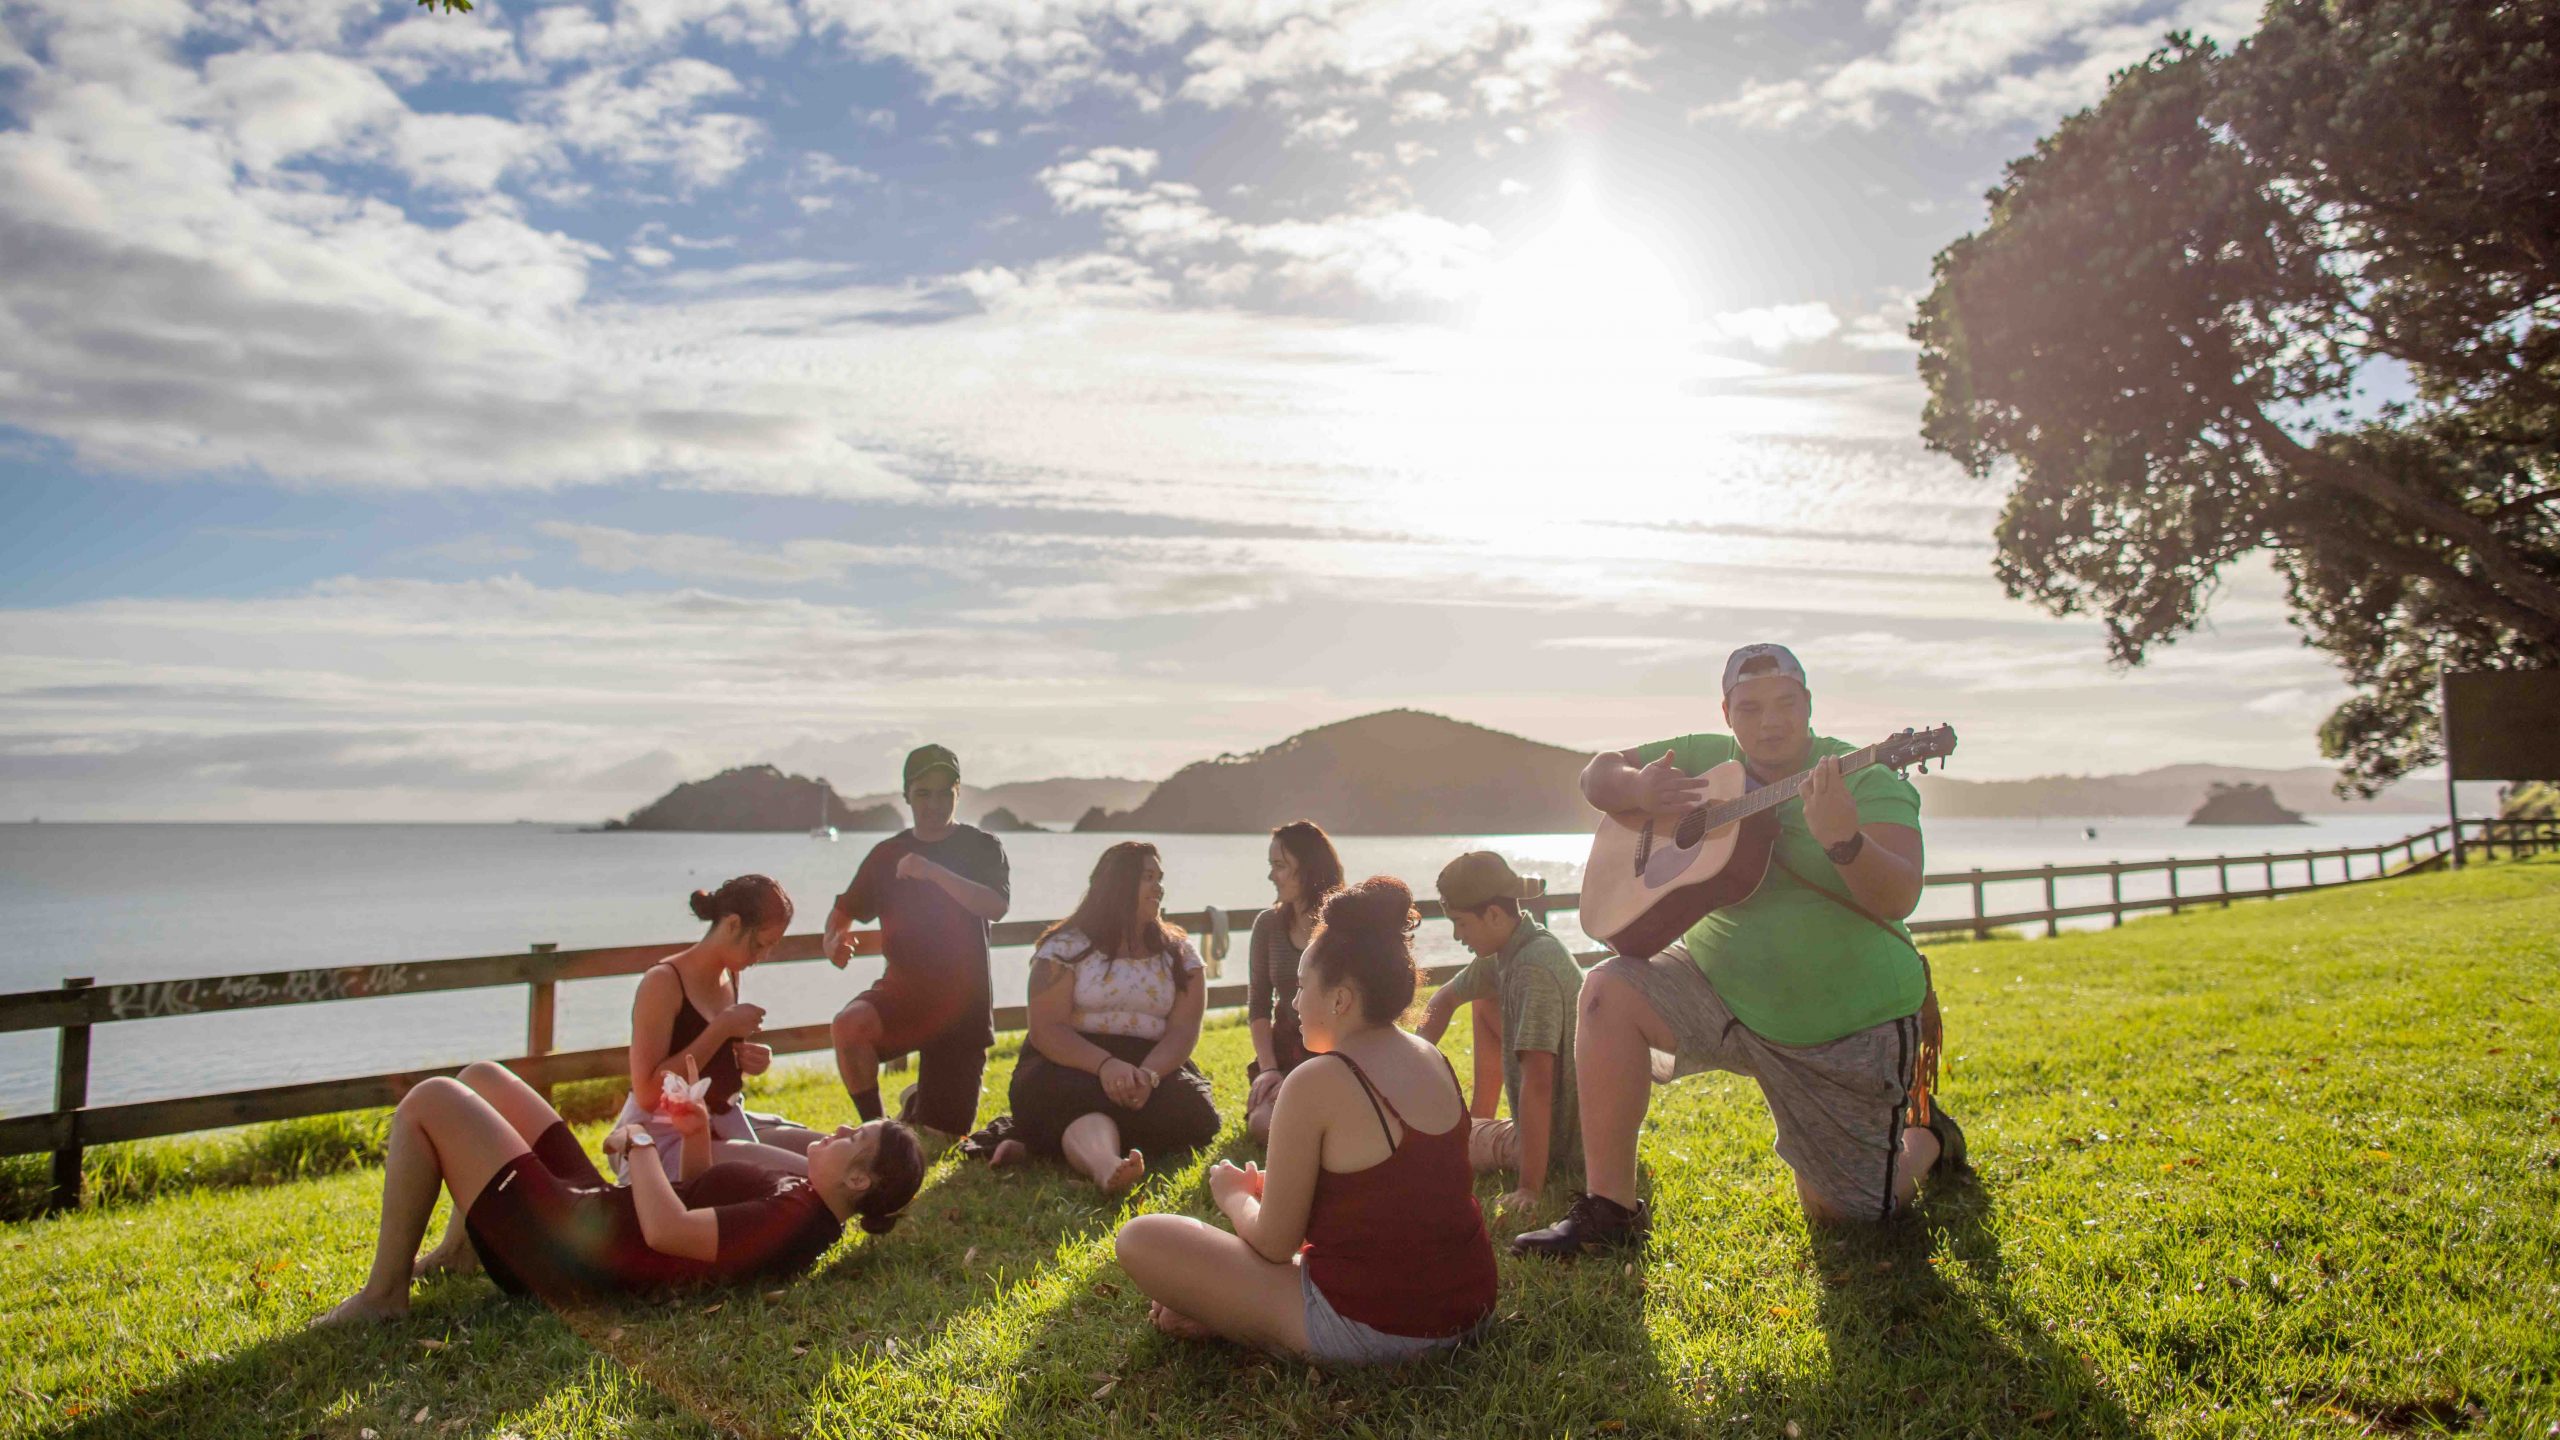 QRC tourism and hospitality Bay of Islands